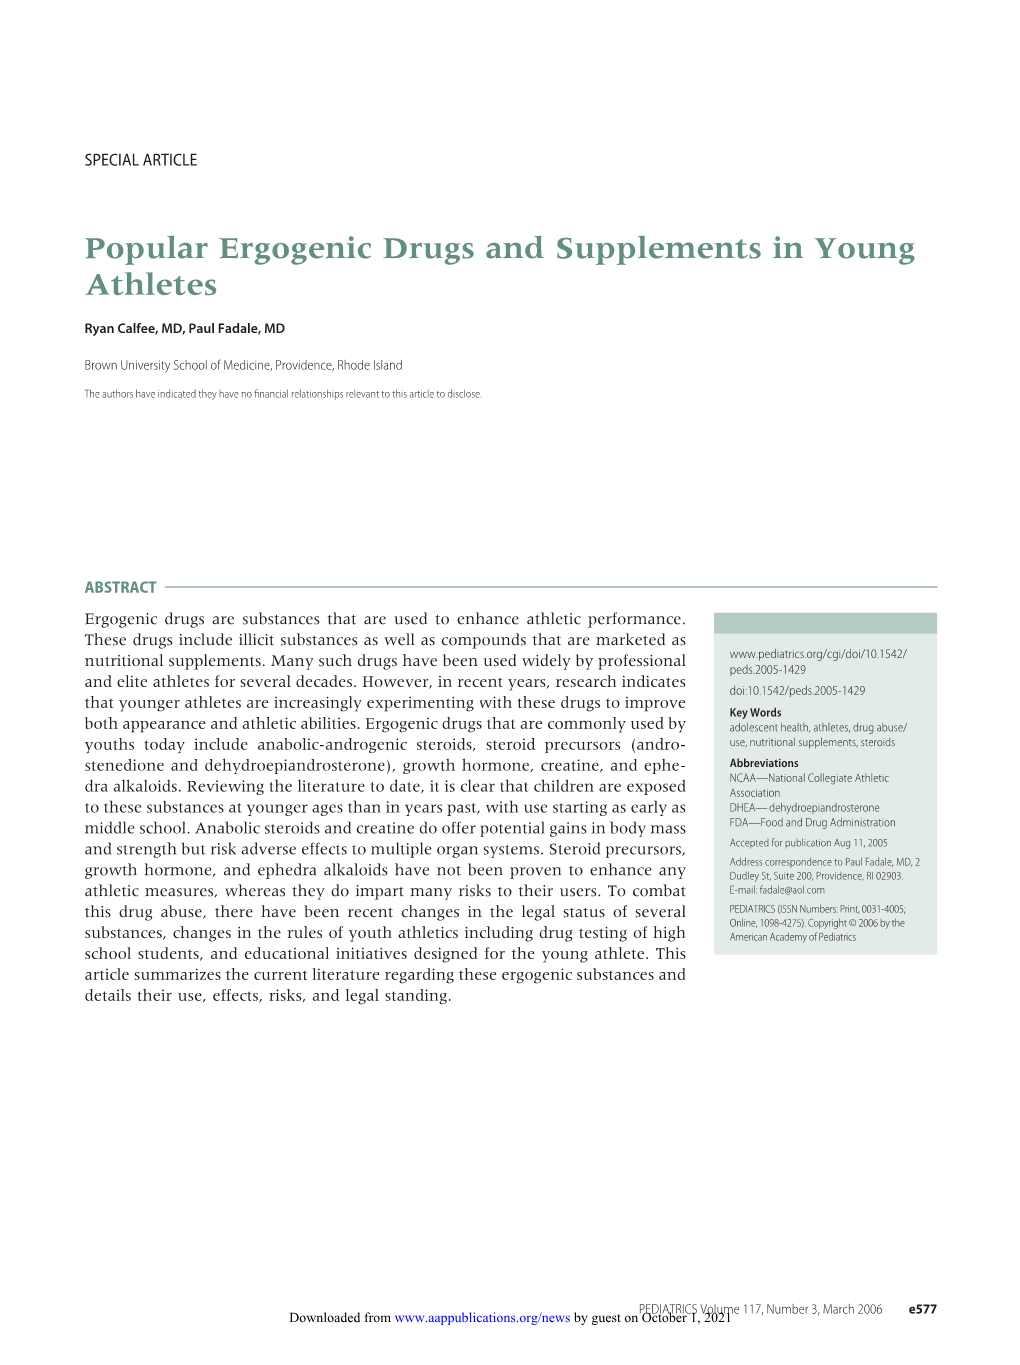 Popular Ergogenic Drugs and Supplements in Young Athletes